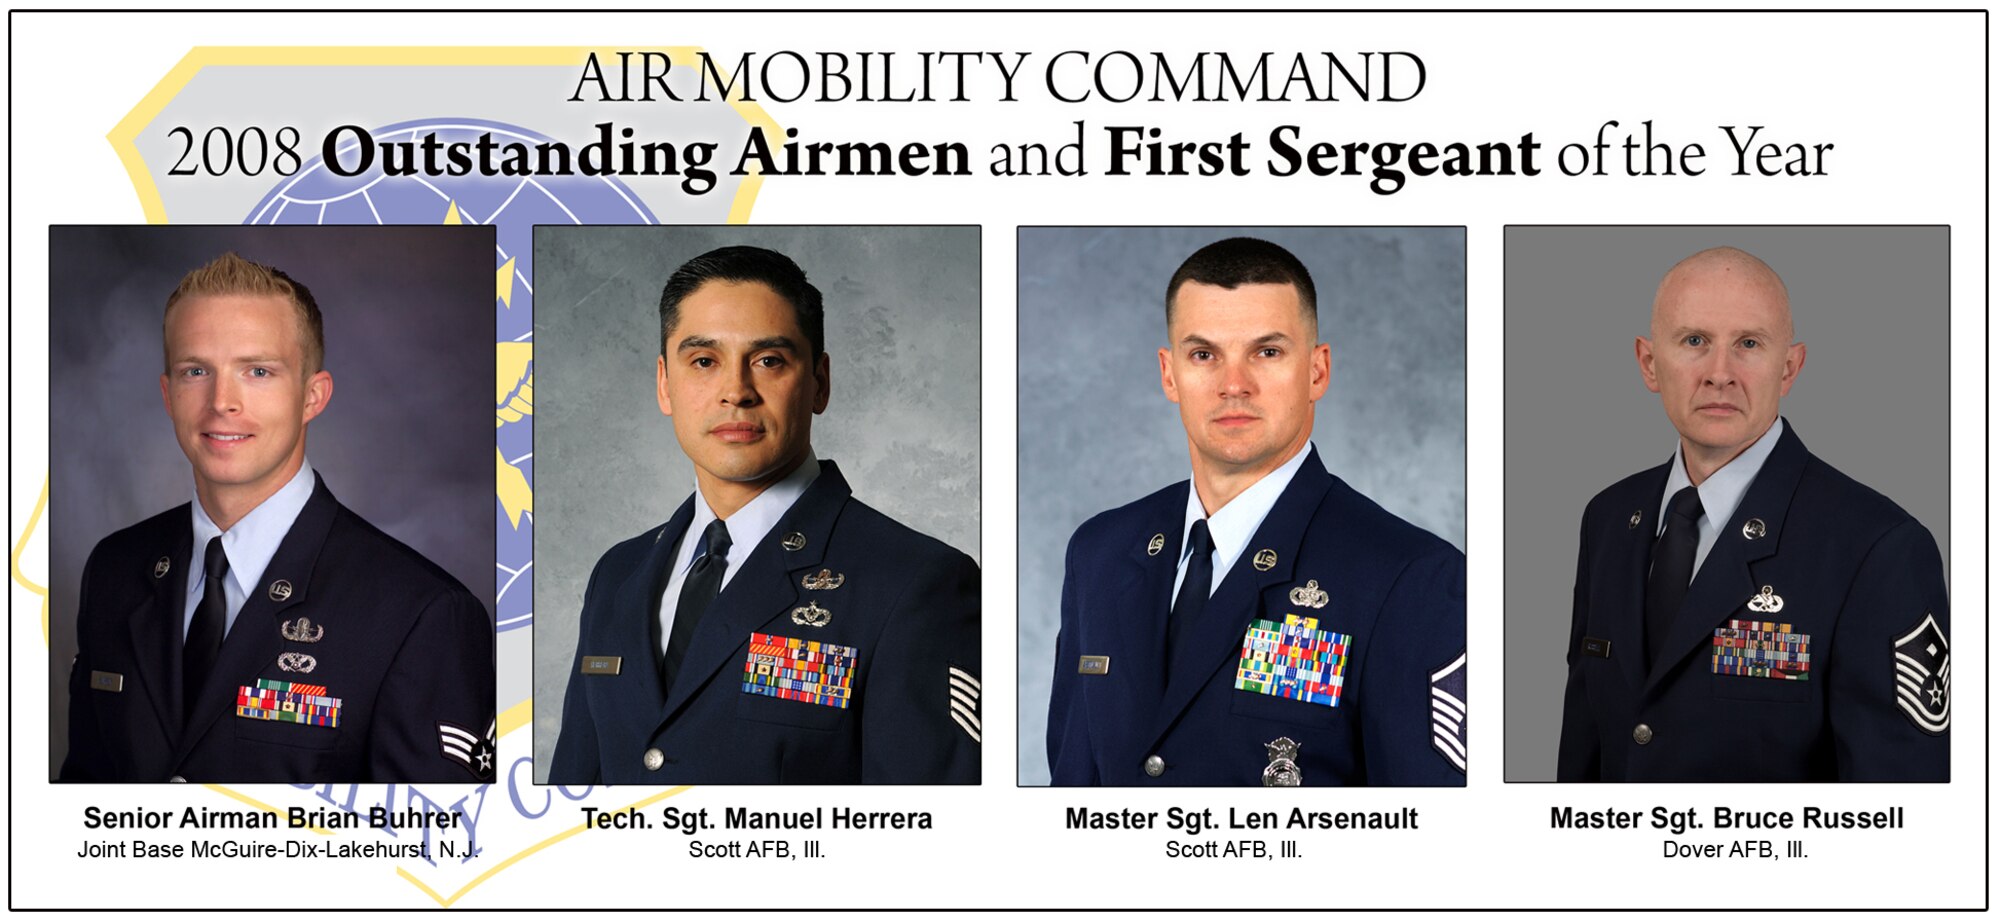 During this year's Air Mobility Command Outstanding Airmen of the Year banquet April 29, four AMC Airmen were recognized as the best of the best in their respective categories.